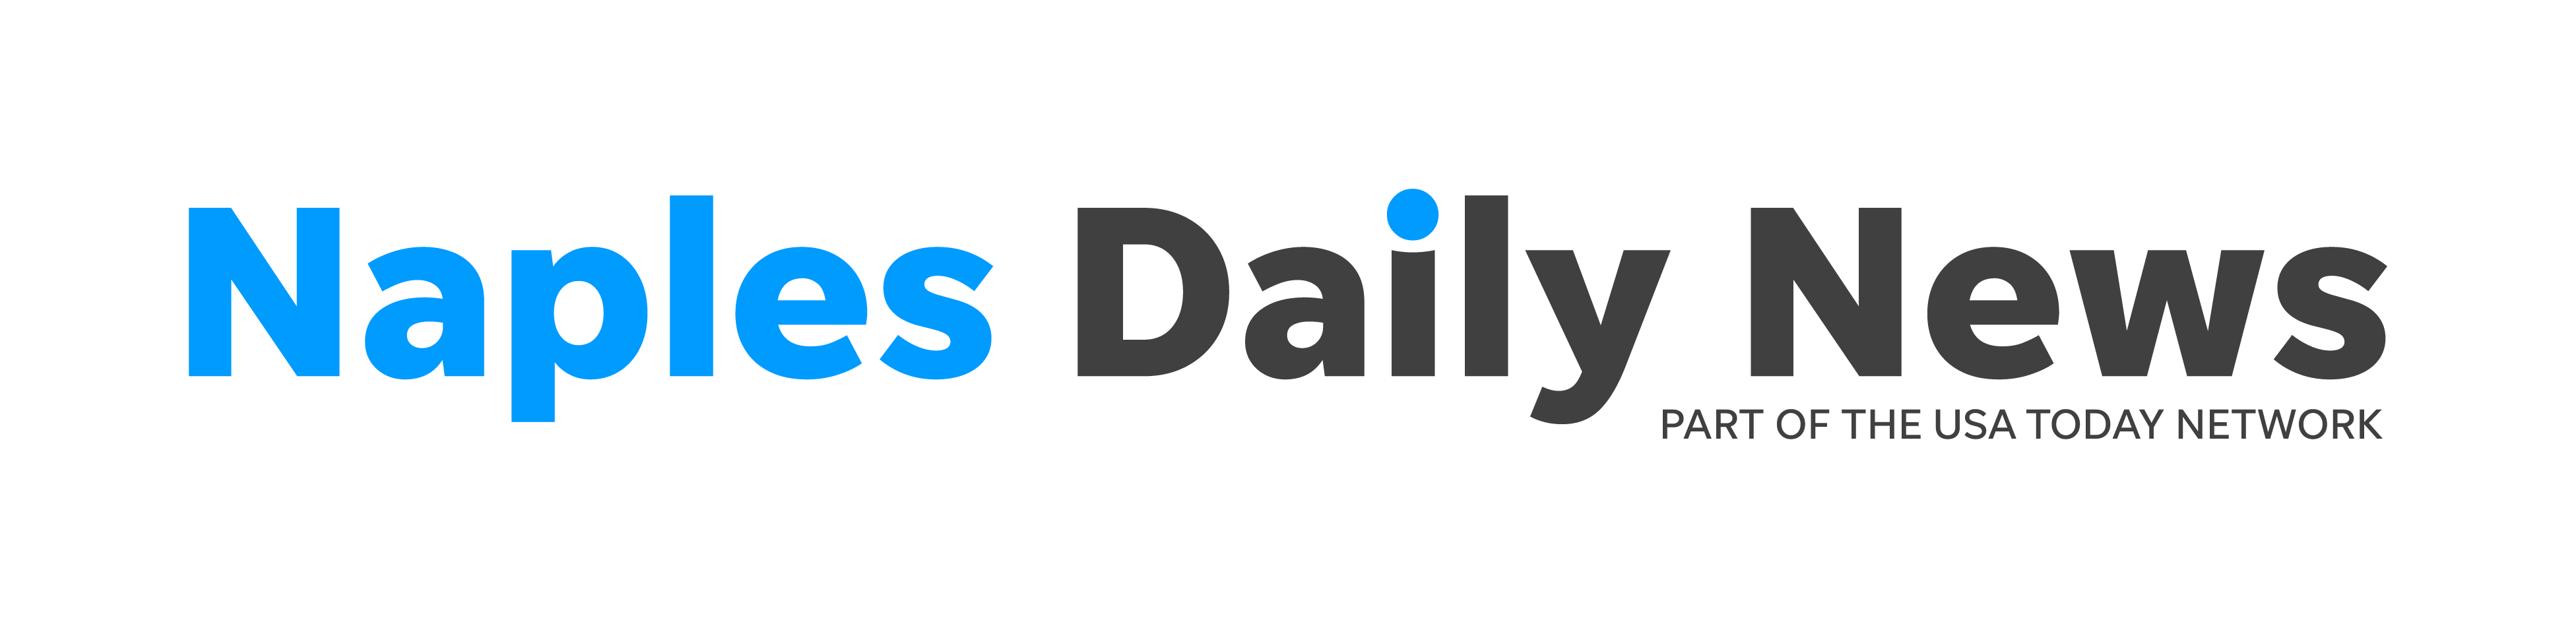 download usa today